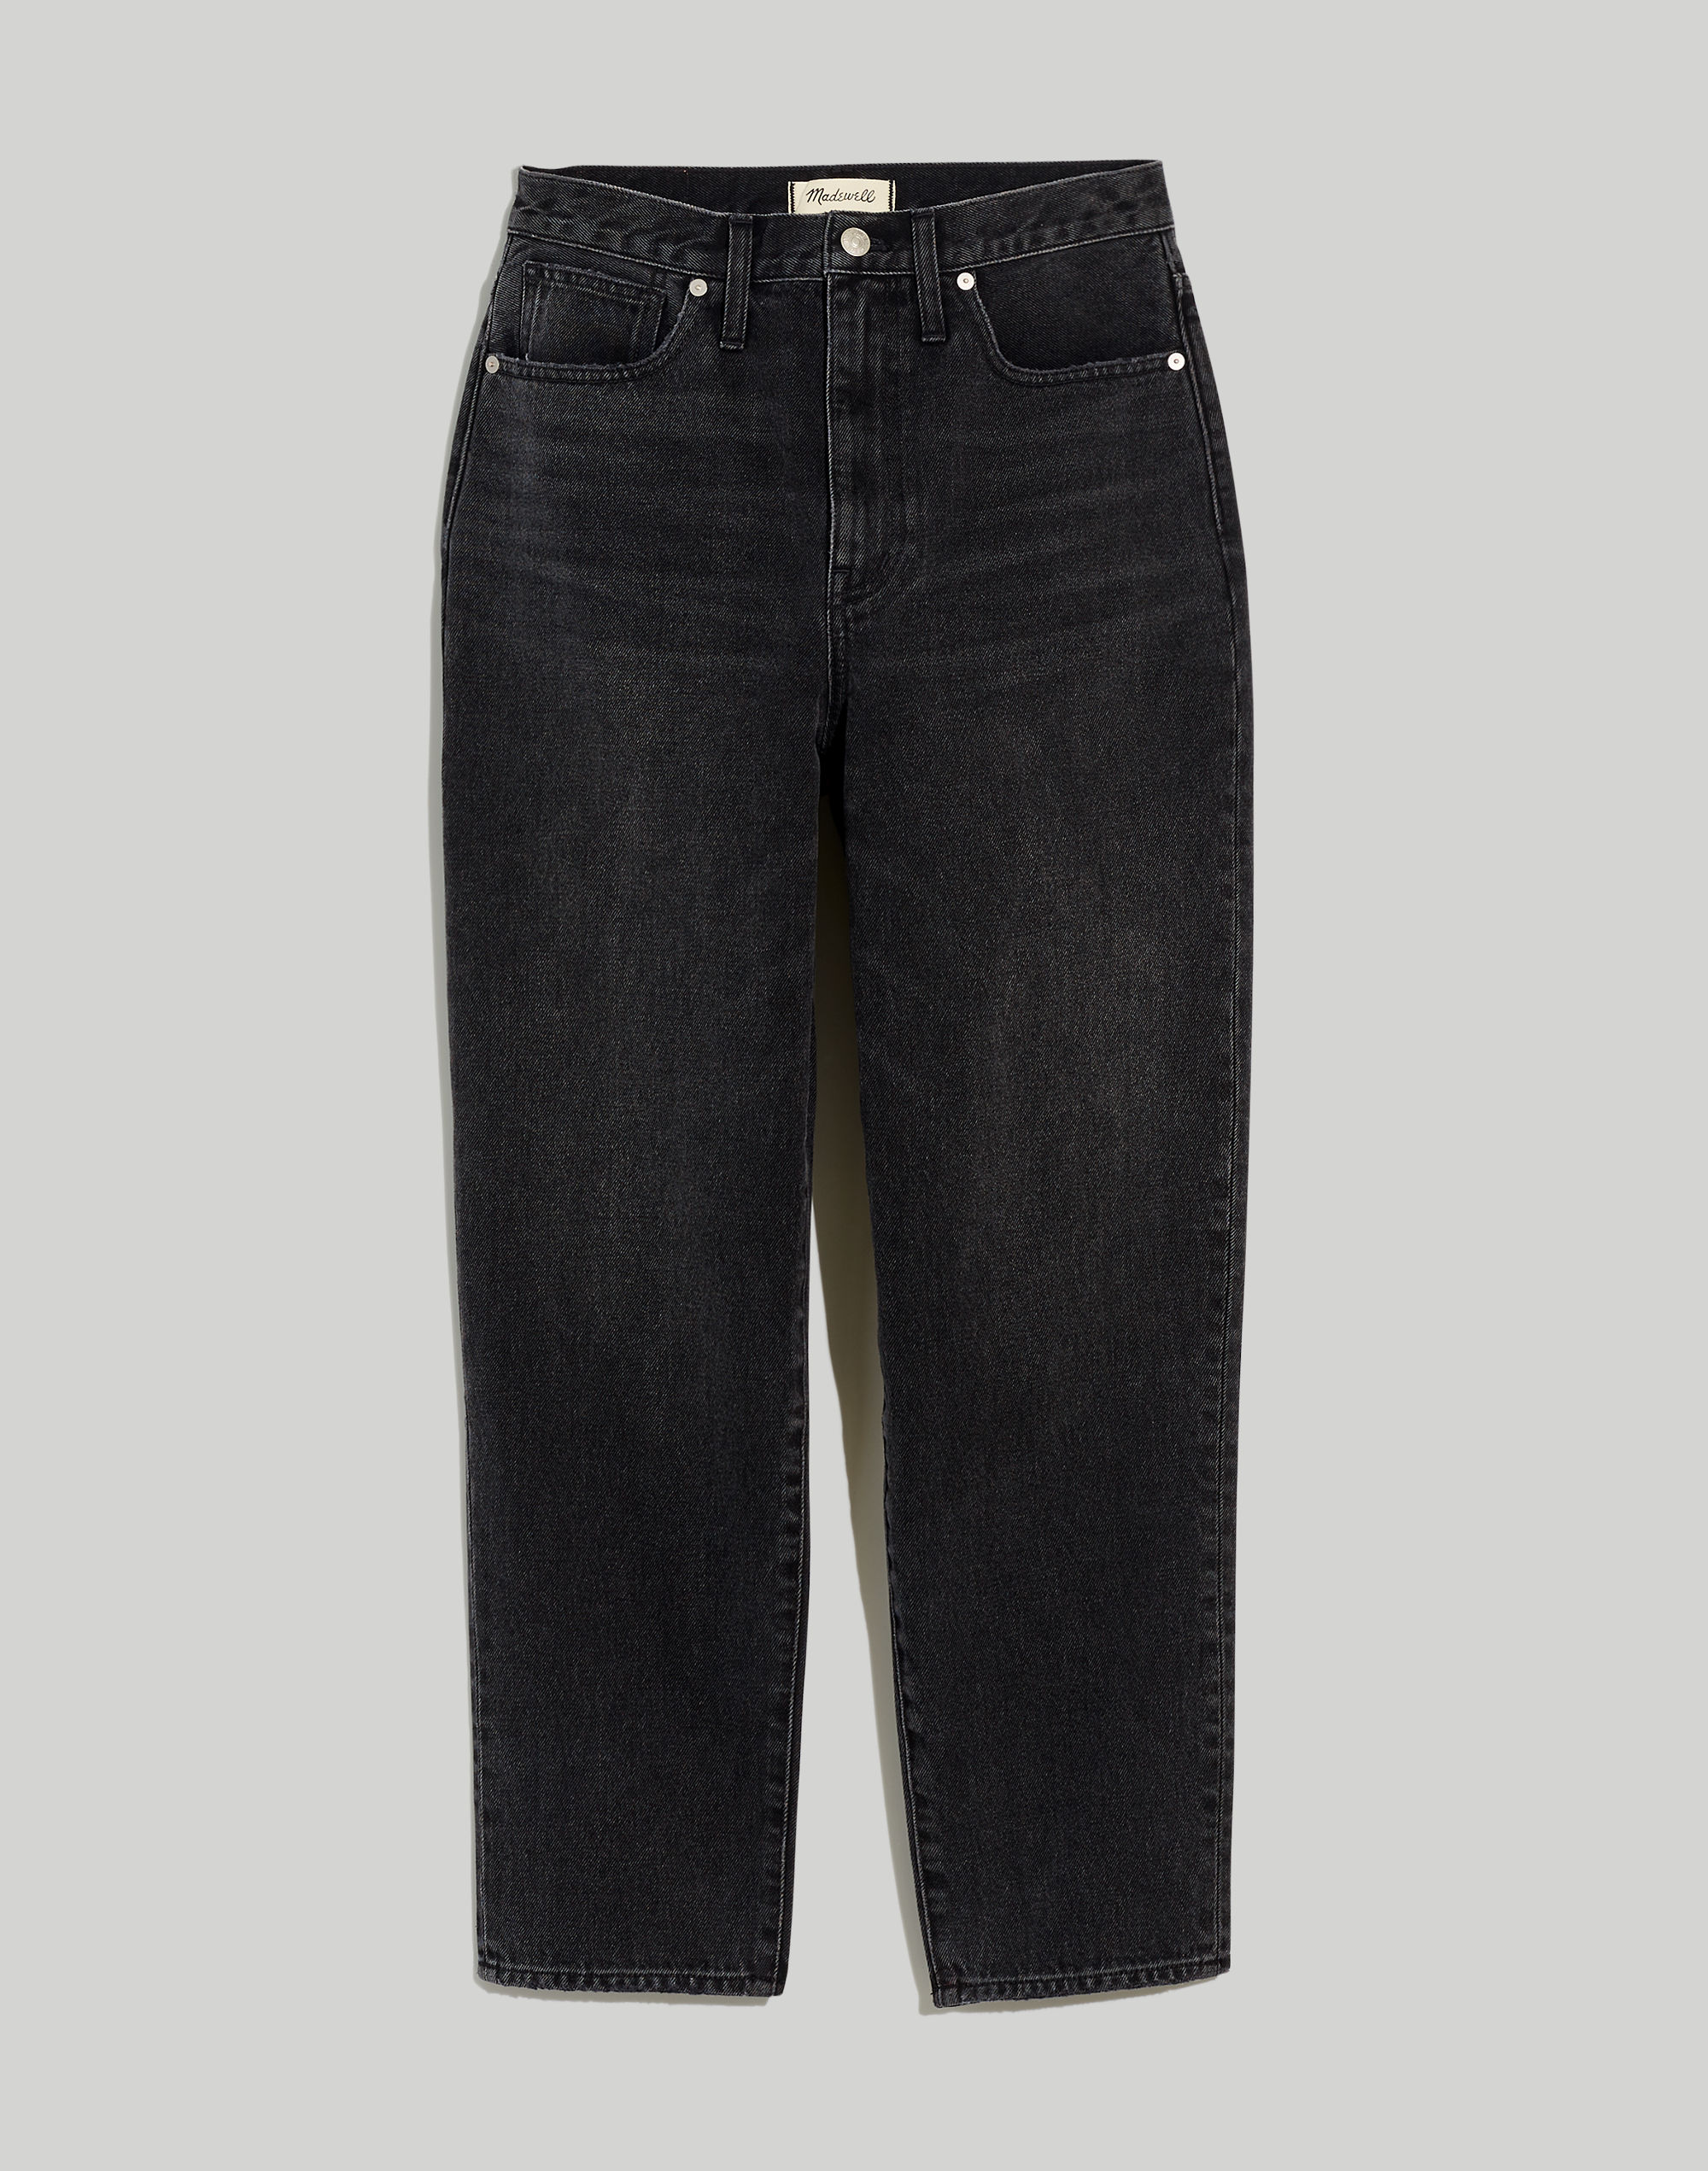 Baggy Tapered Jeans in Mackinnon Wash